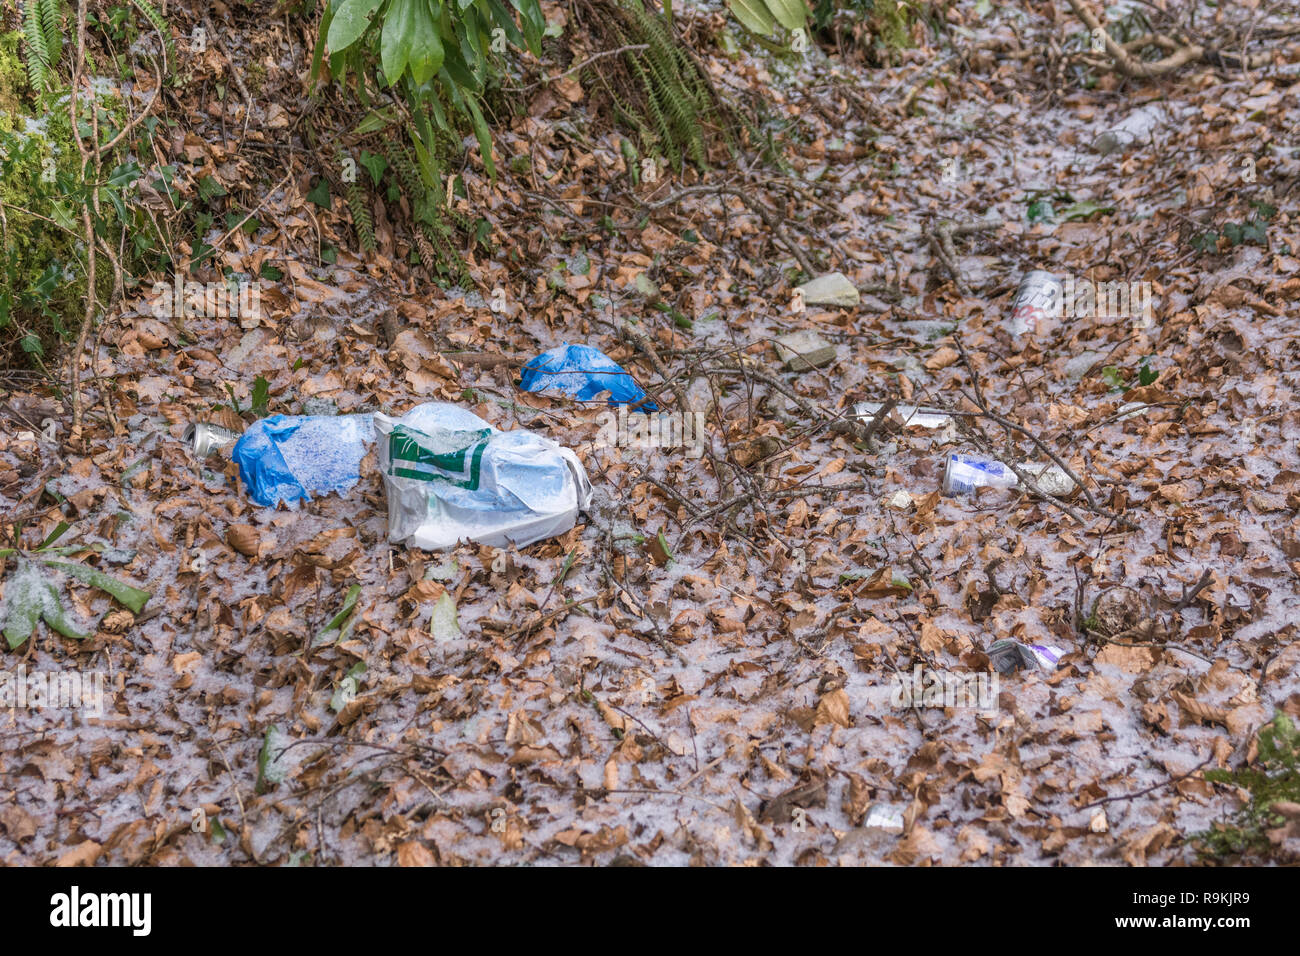 Plastic rubbish discarded in rural hedgerow ditch. Metaphor plastic pollution, environmental pollution, war on plastic waste, plastic rubbish. Stock Photo